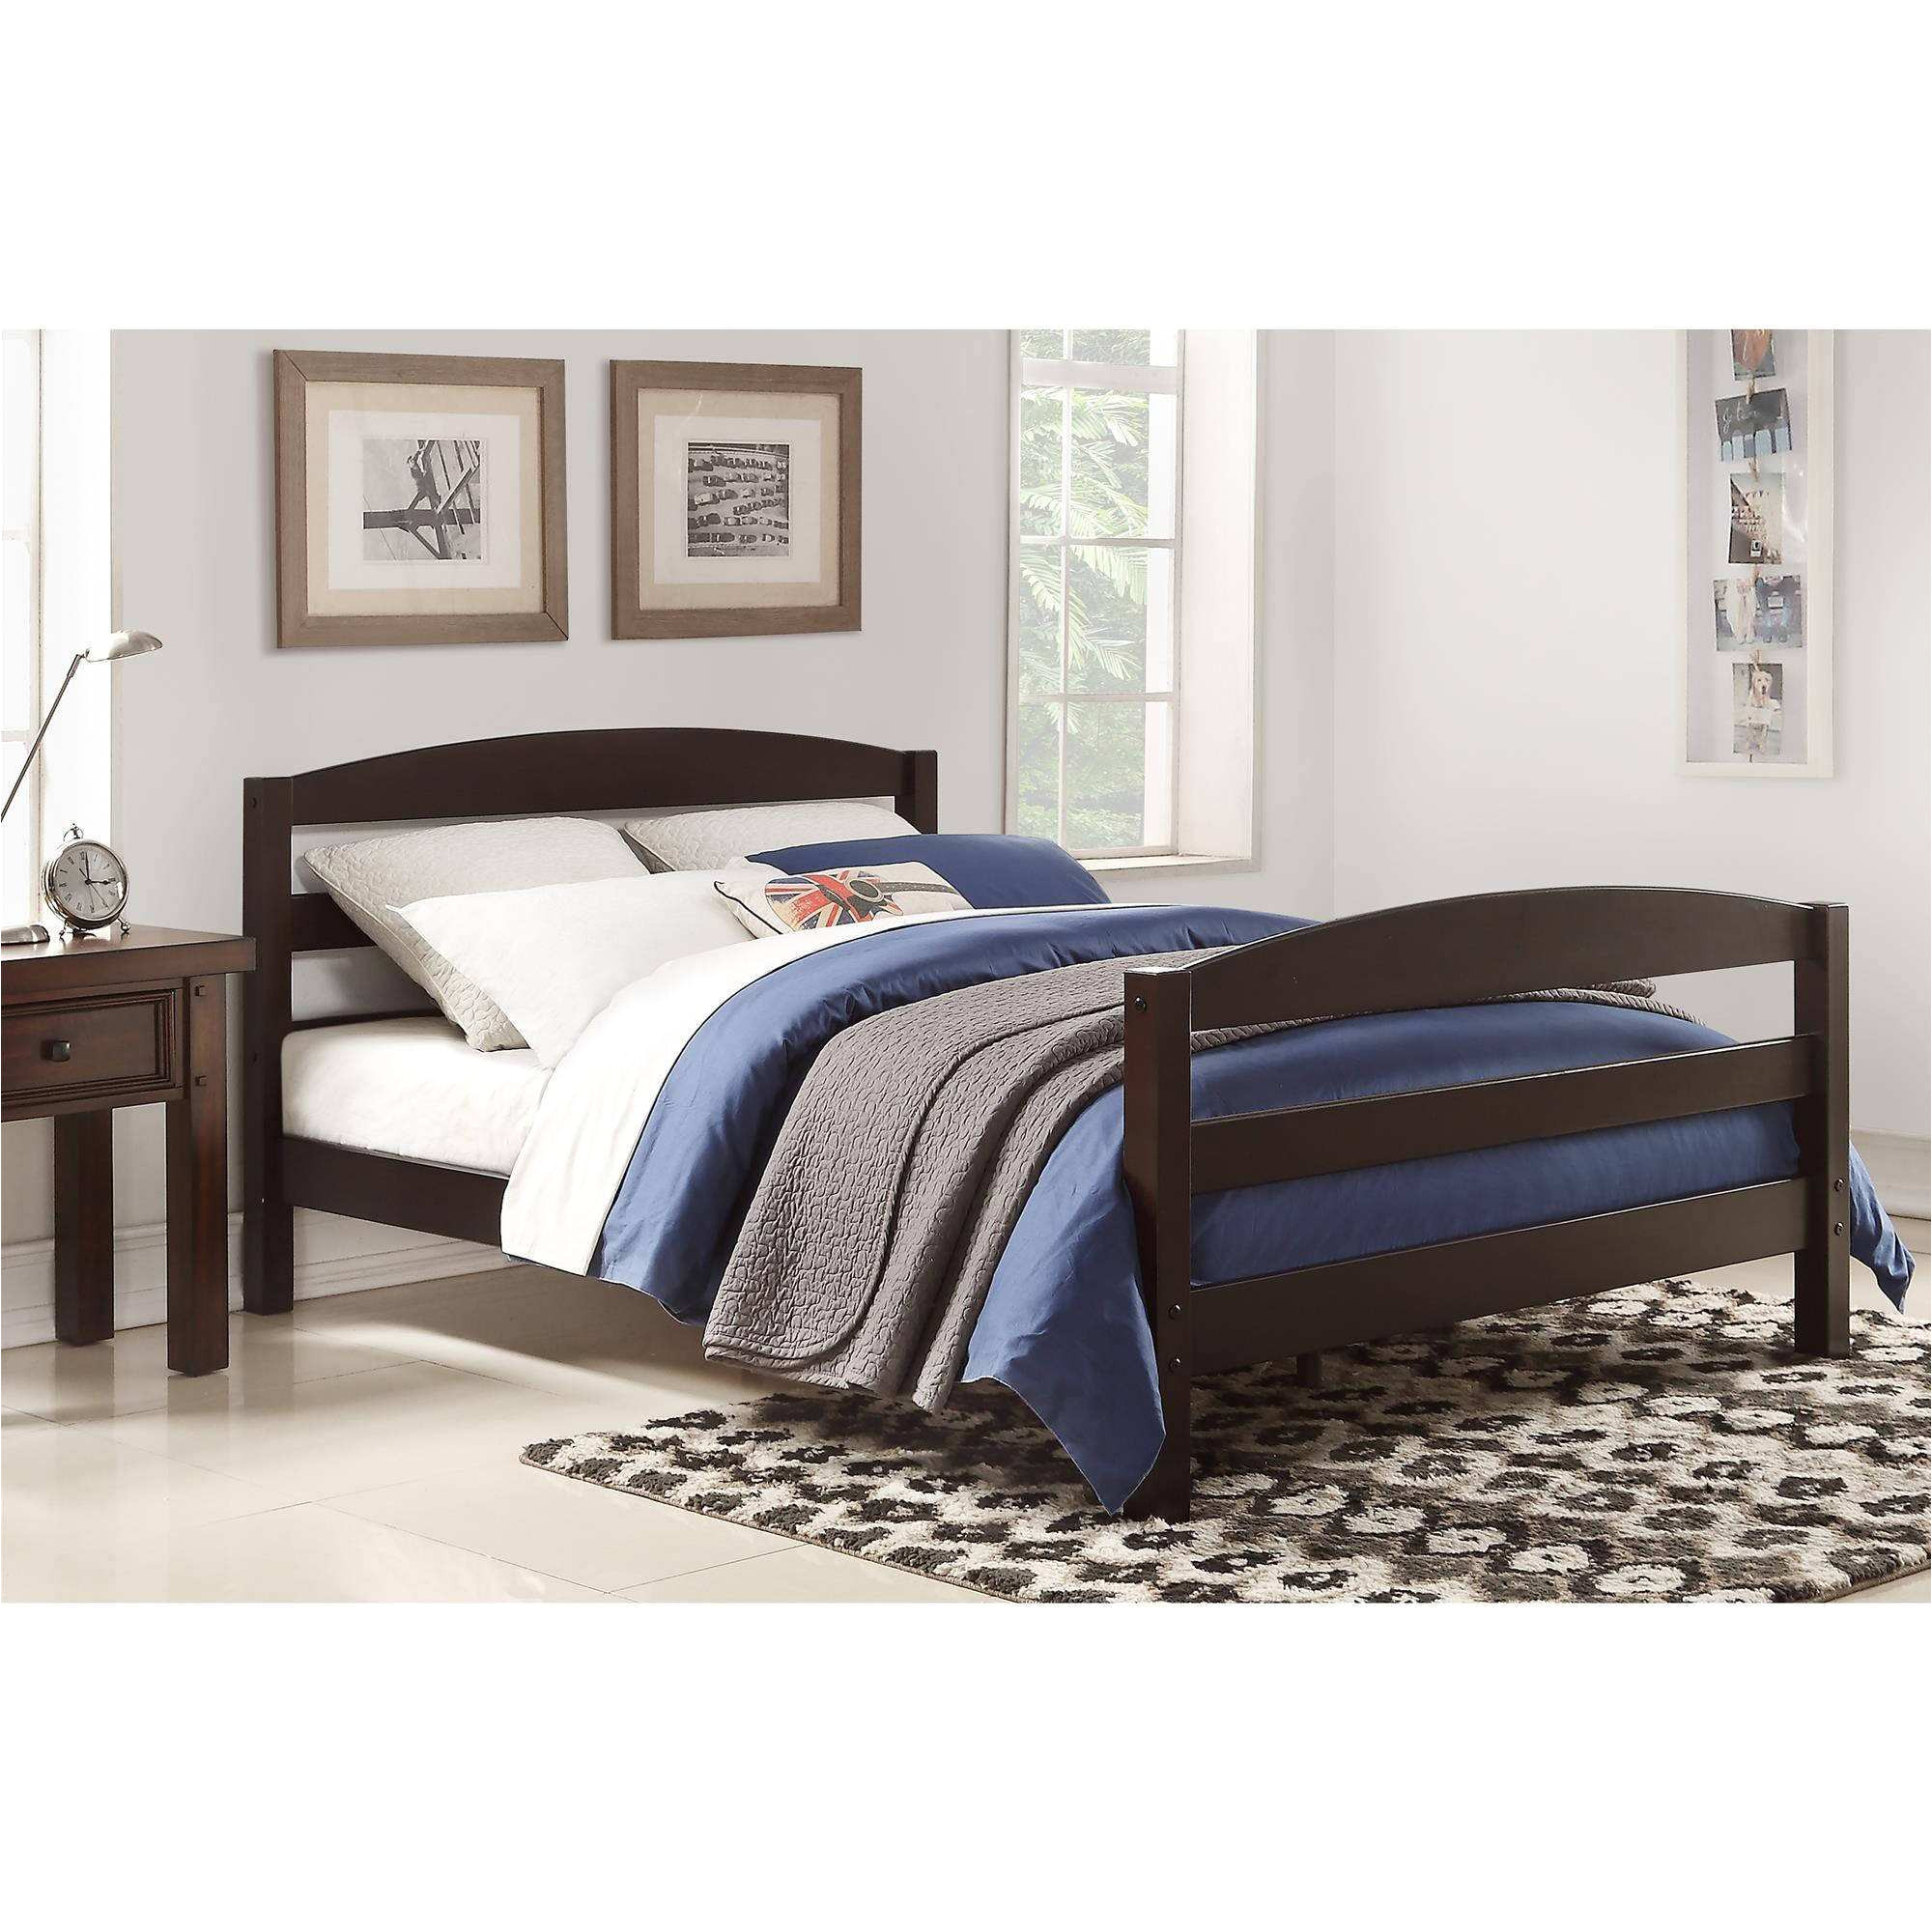 extra strong bed frame awesome better homes and gardens leighton full bed multiple colors of extra